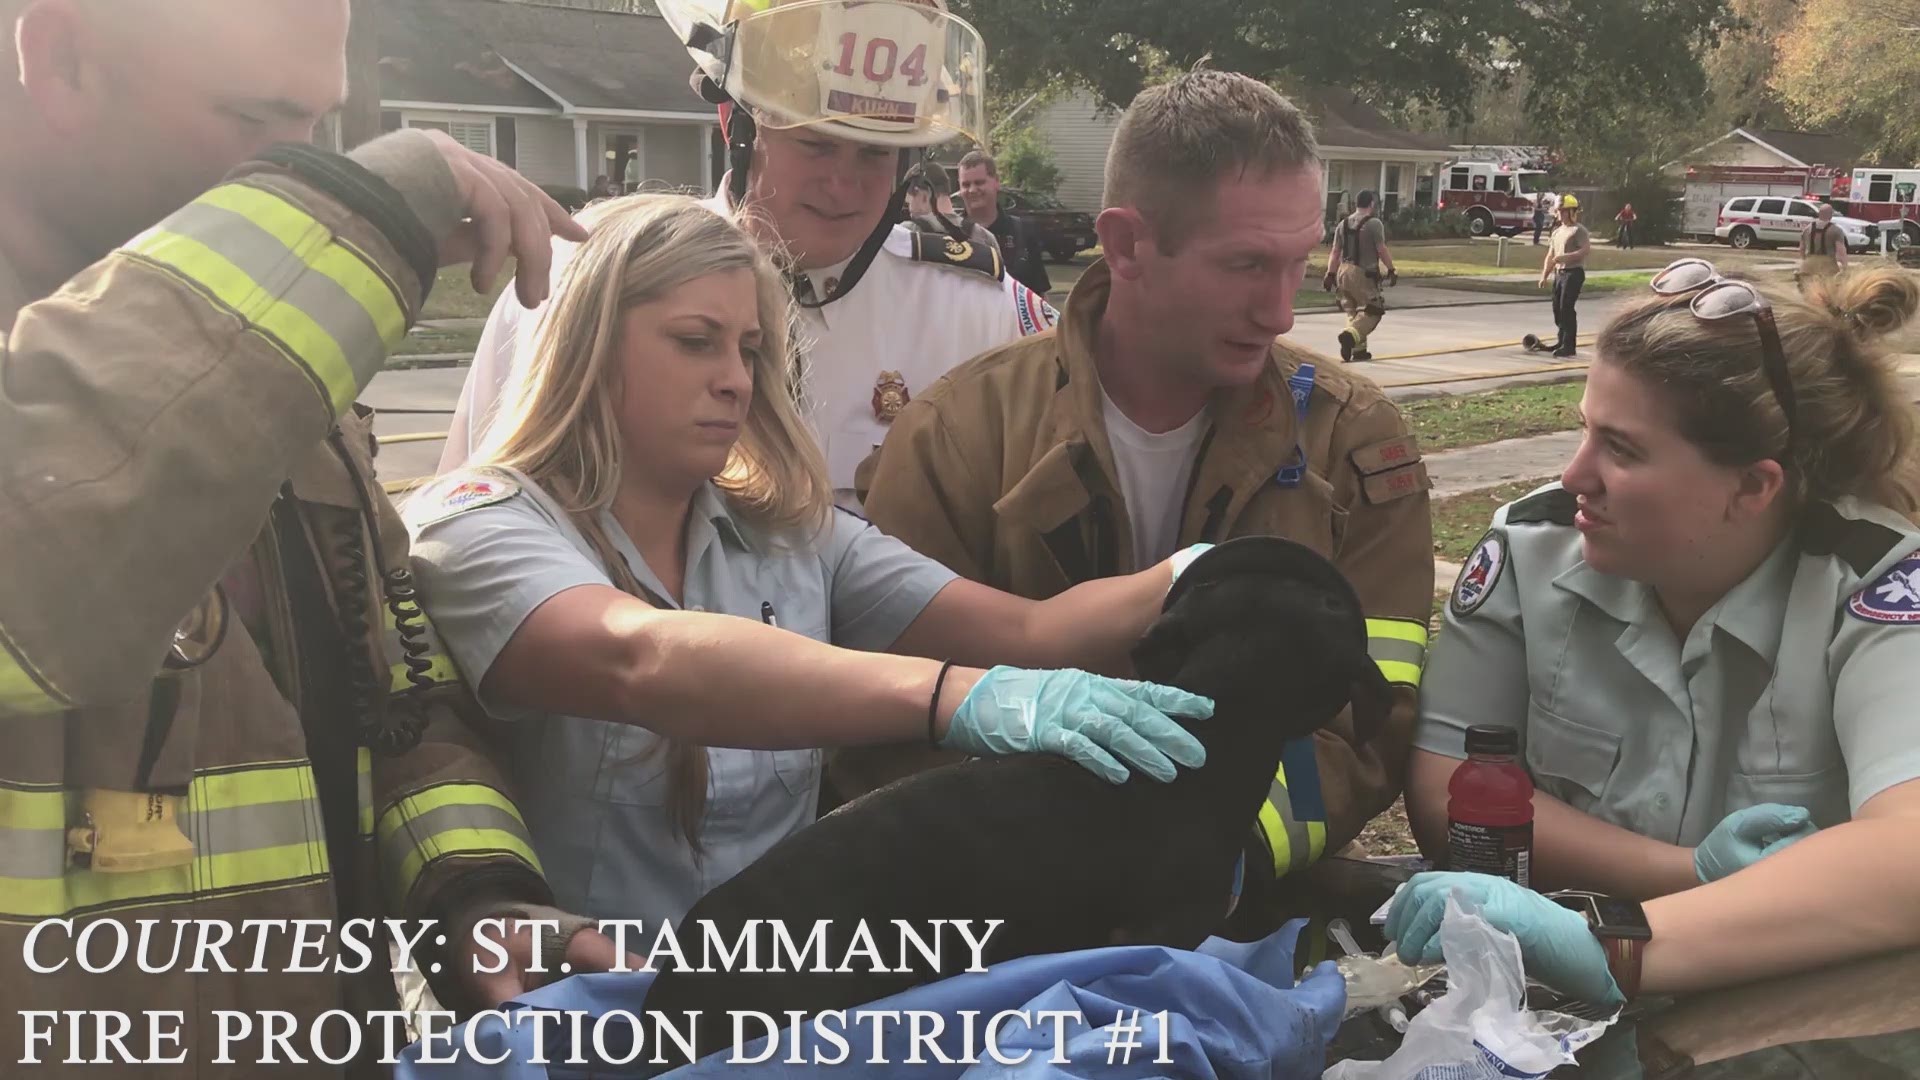 Firefighters and other first responders saved the dog using an oxygen mask.